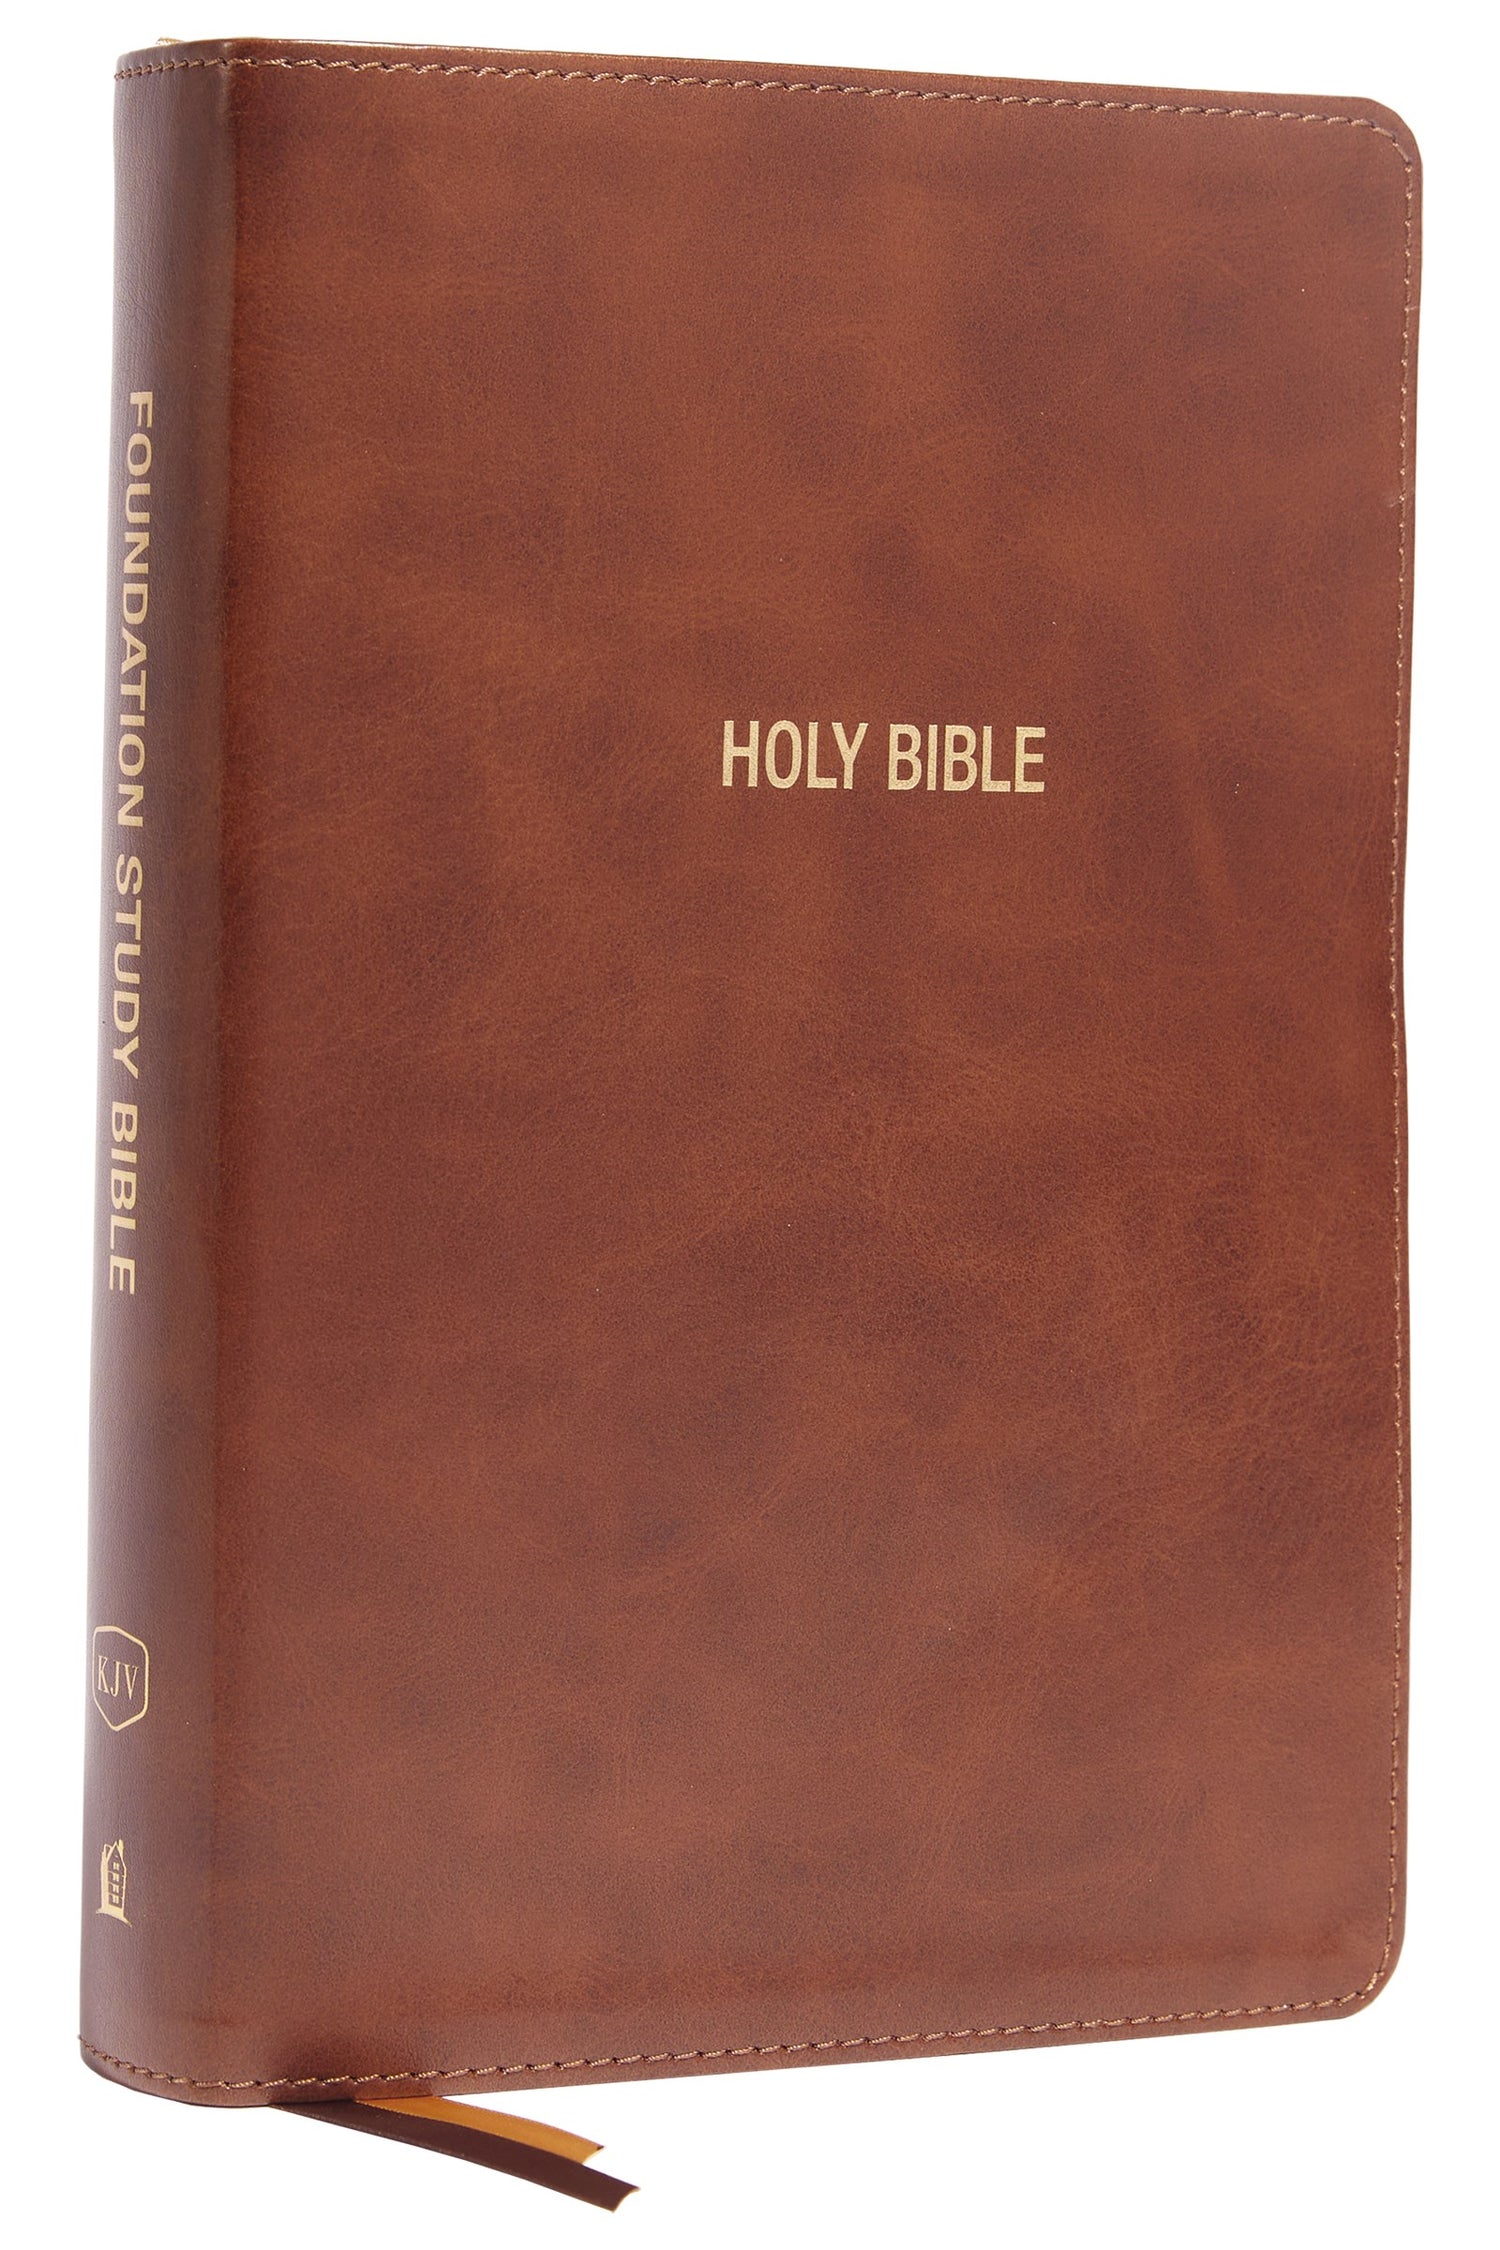 Seed of Abraham Christian Bookstore - (In)Courage - KJV Foundation Study Bible/Large Print (Comfort Print)-Brown Leathersoft Indexed